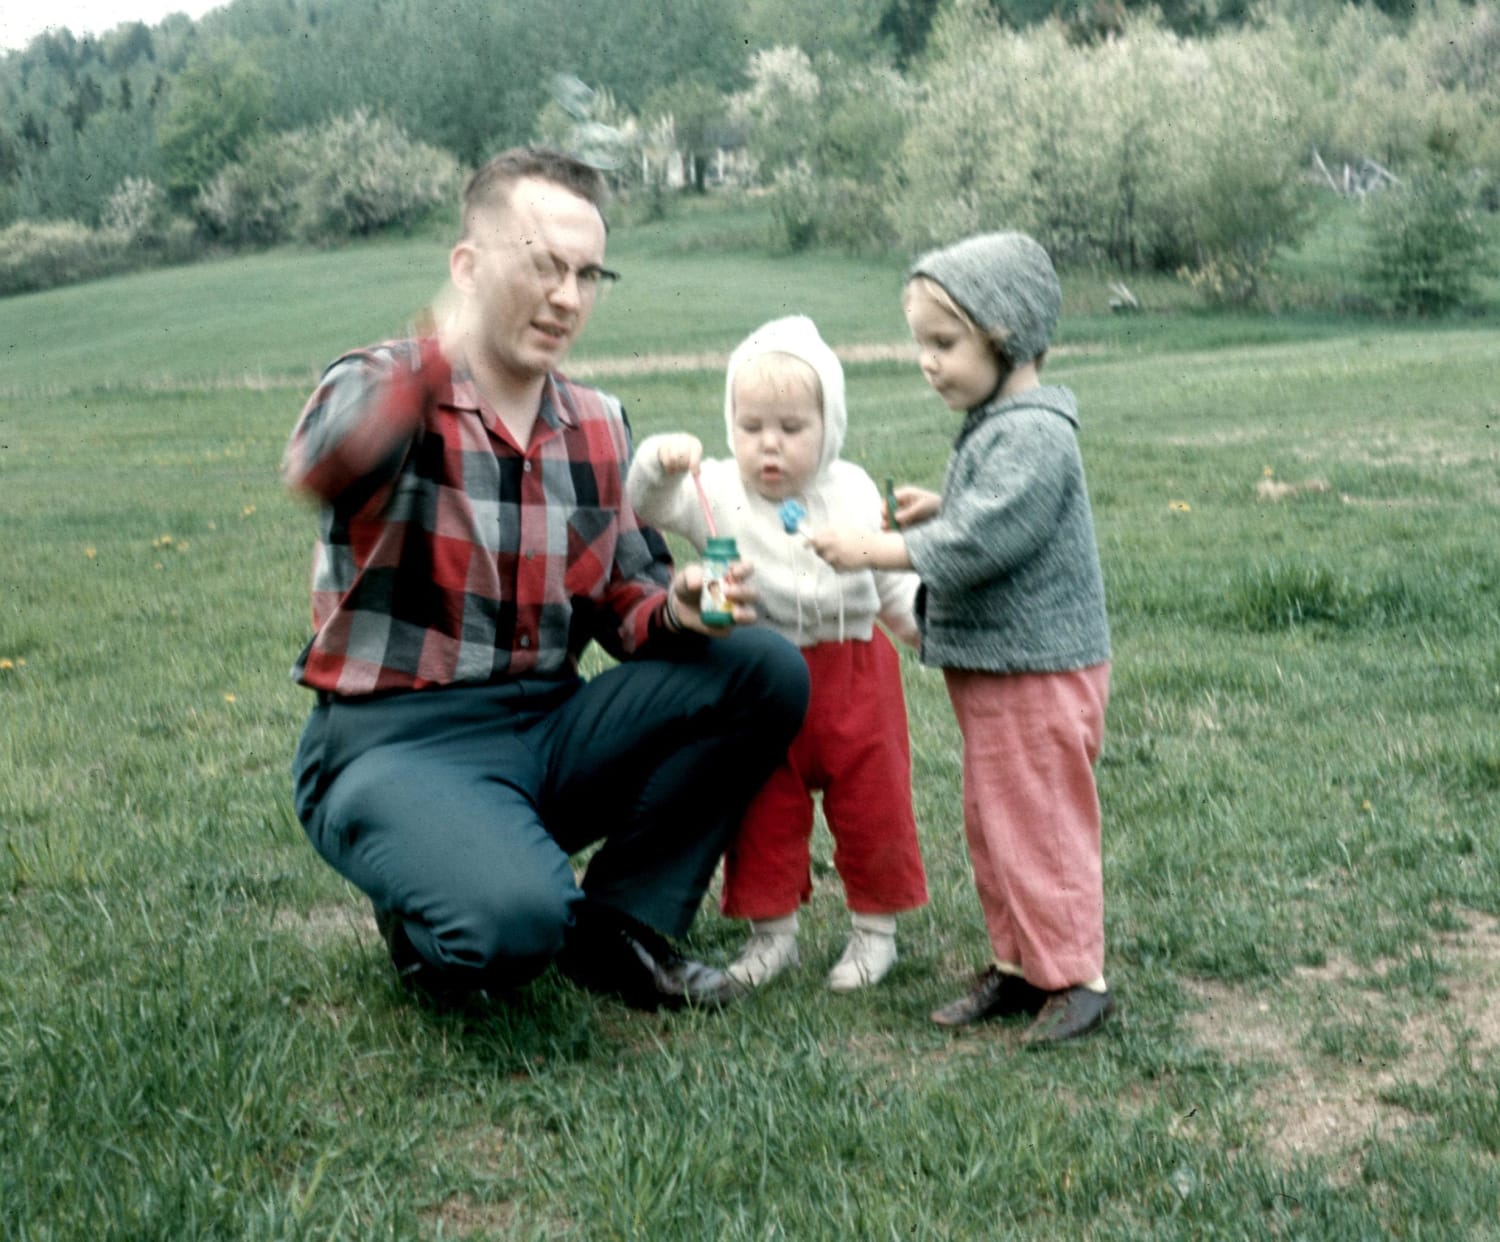 Blowing Bubbles, 1966. My sister (age 3 in this pic) still lives on that land in a house built where the camp on the hill was.